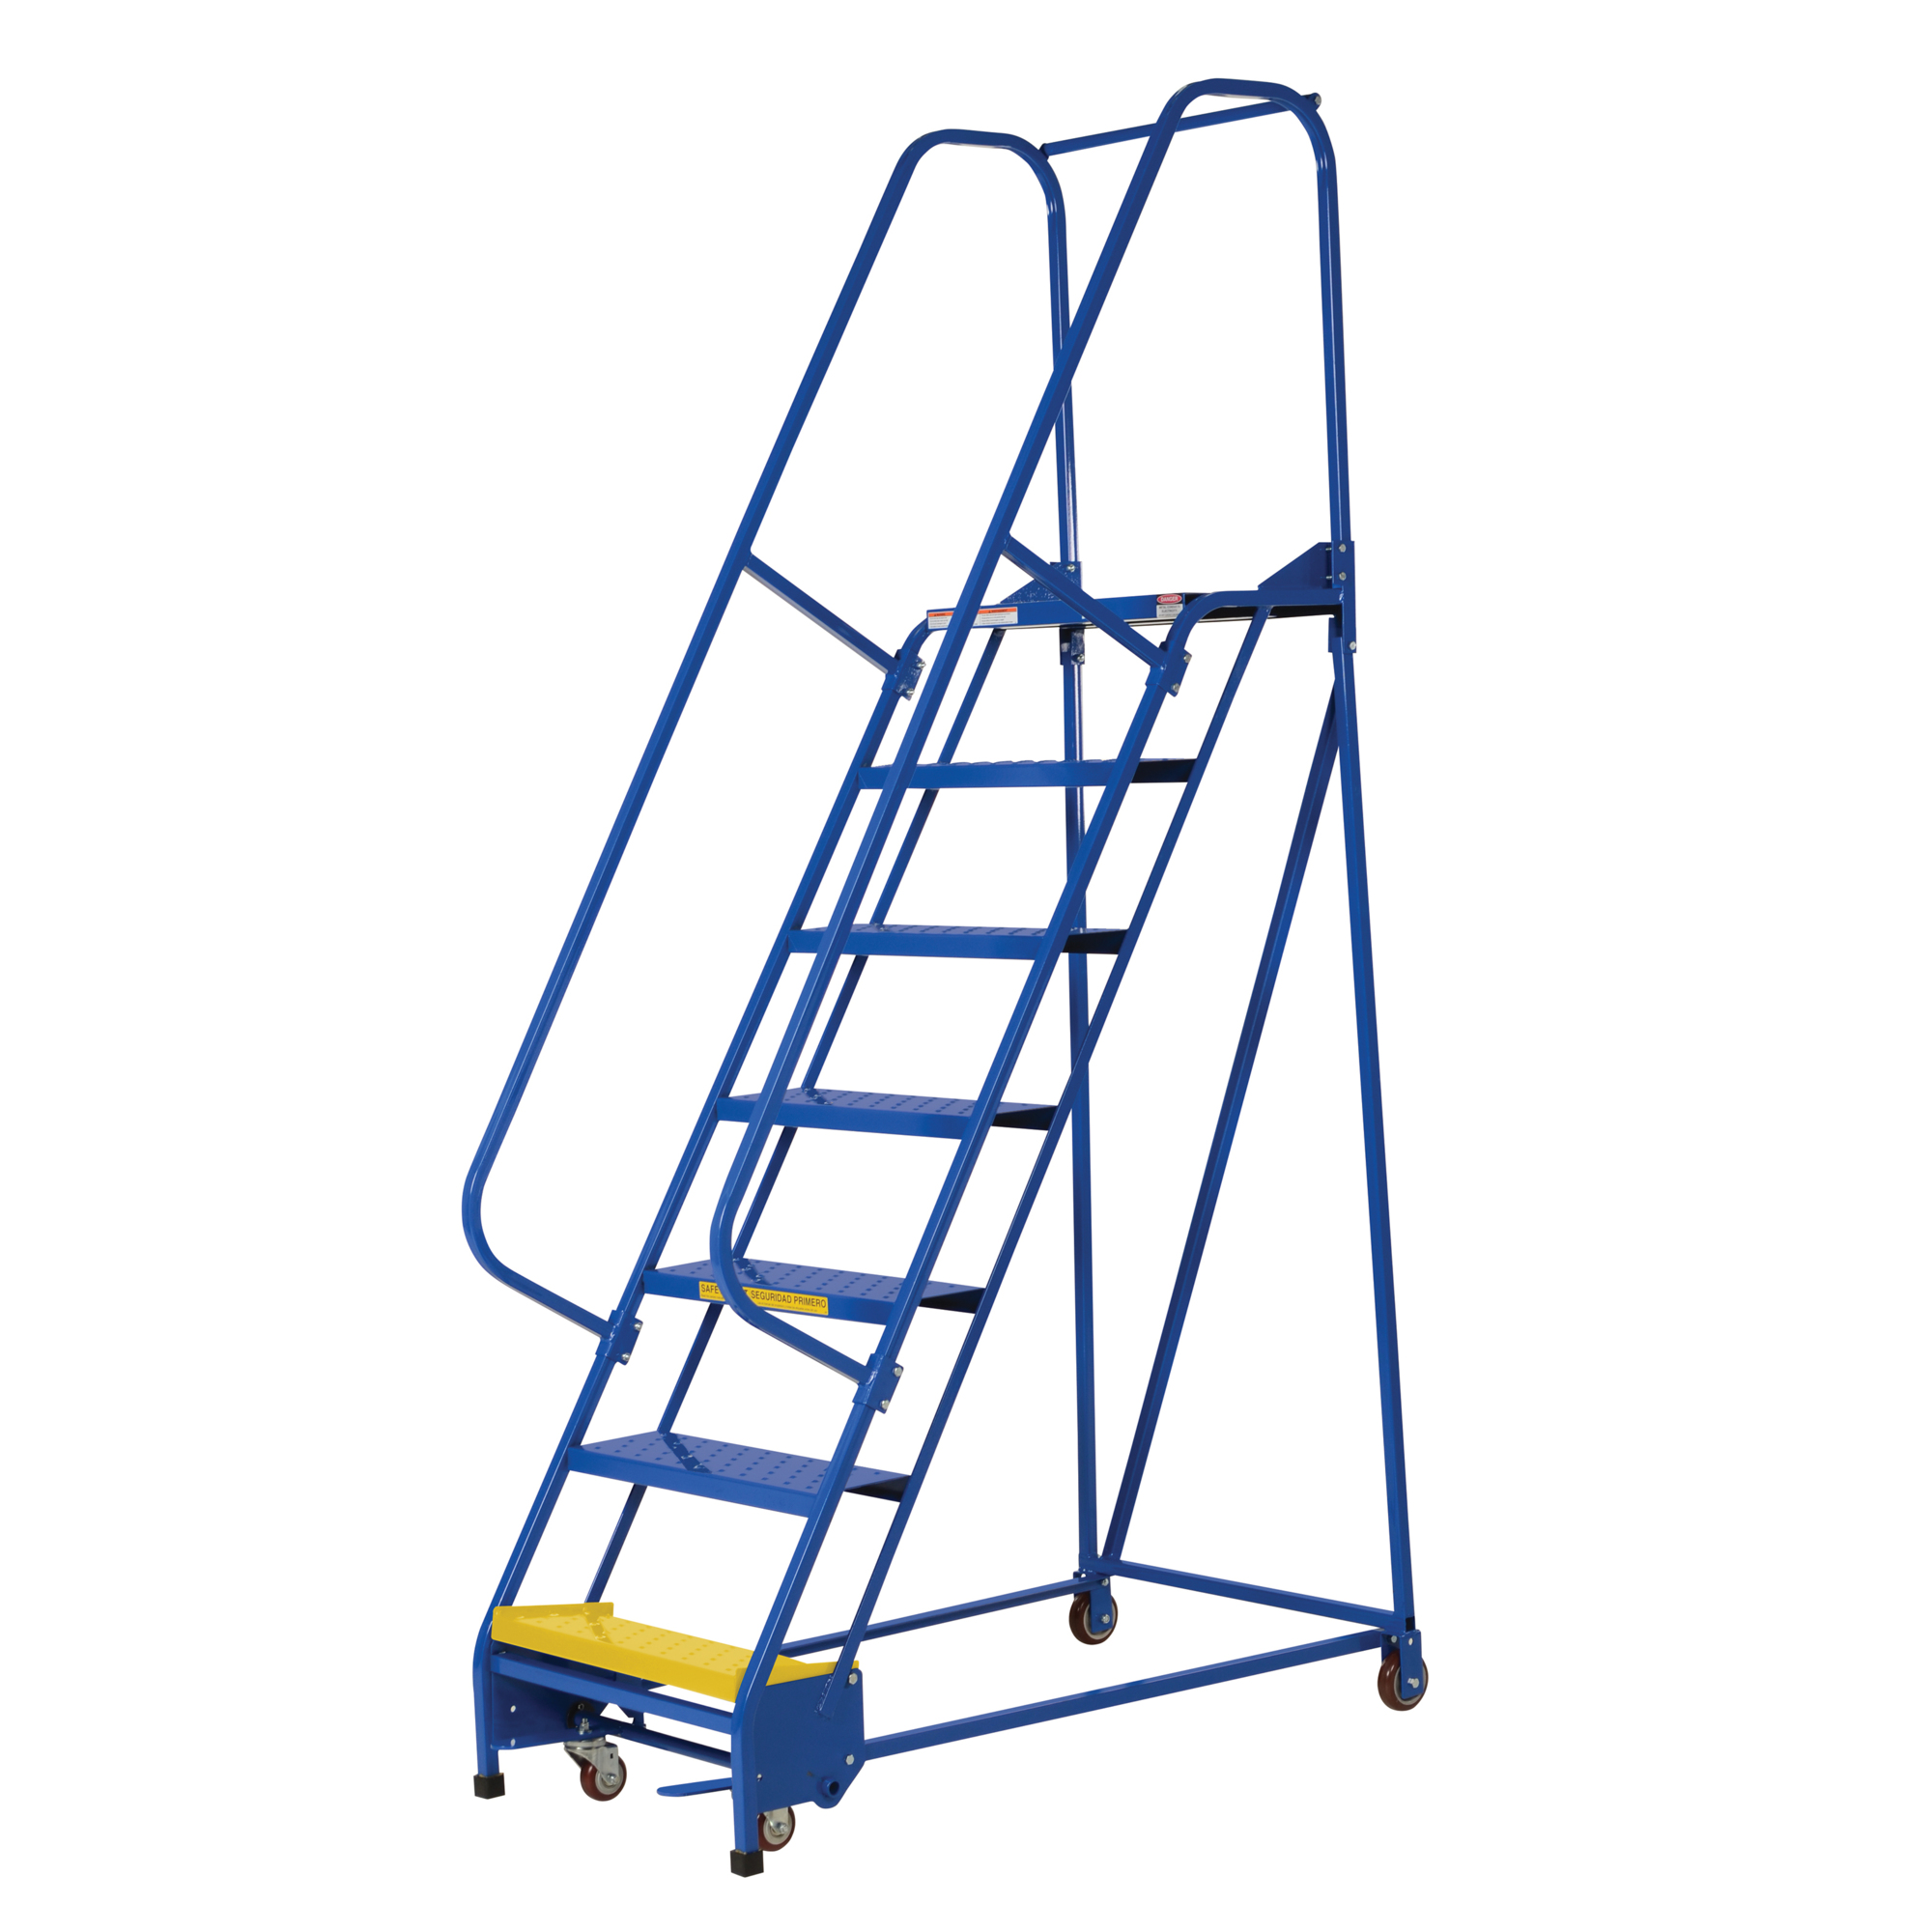 Vestil, 7 Step perforated warehouse ladder, Overall Height 100 in, Steps 7 Material Steel, Model LAD-PW-26-7-P